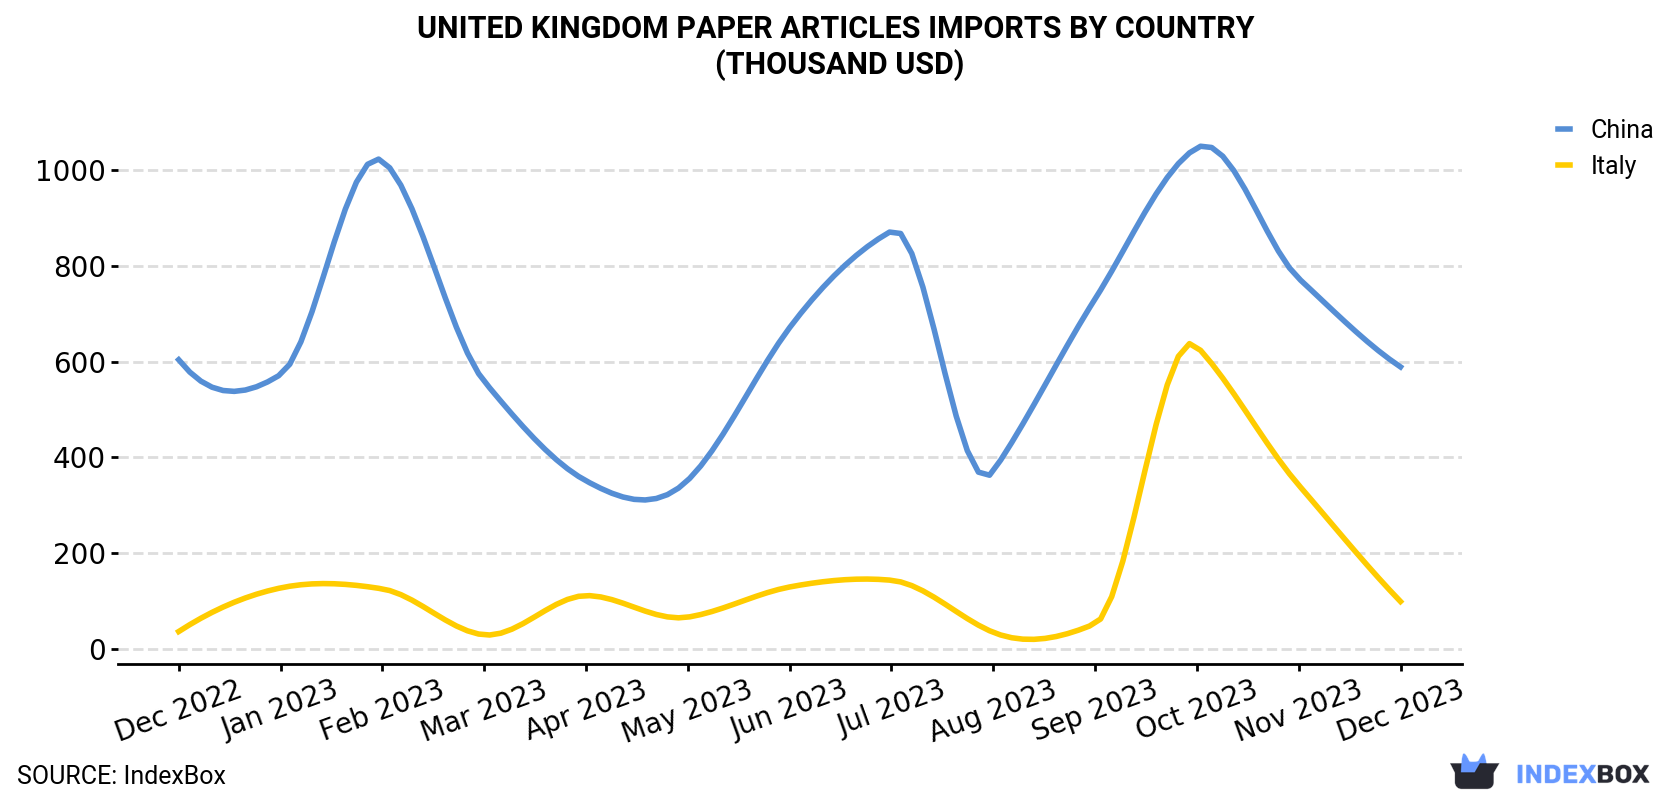 United Kingdom Paper Articles Imports By Country (Thousand USD)